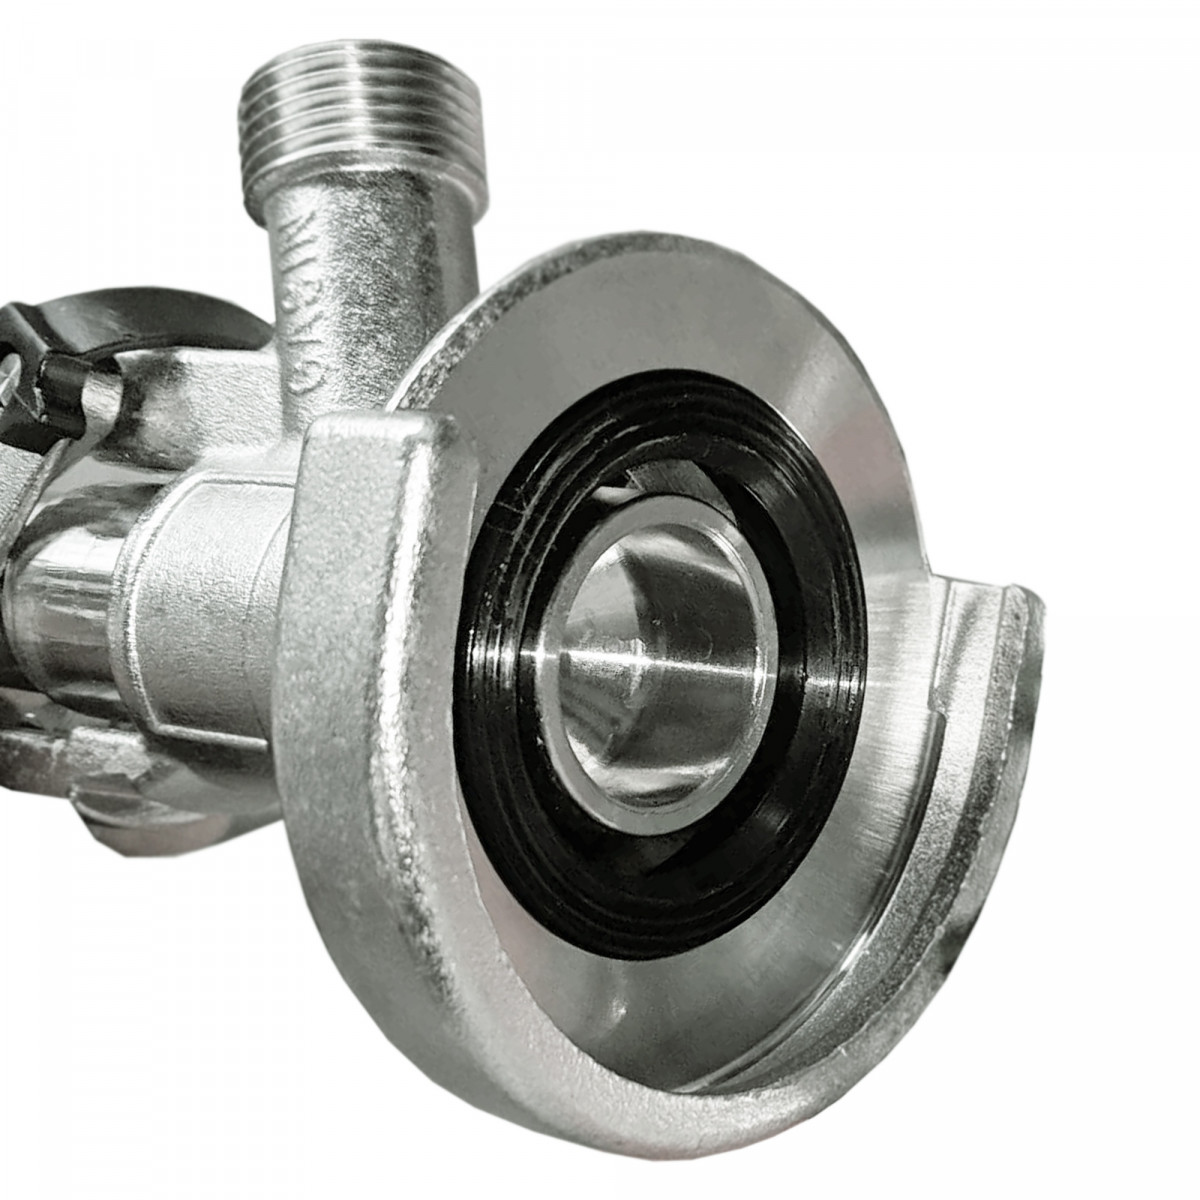 A-Type Keg Coupler – Stainless Steel – With 2 Duotight Fittings